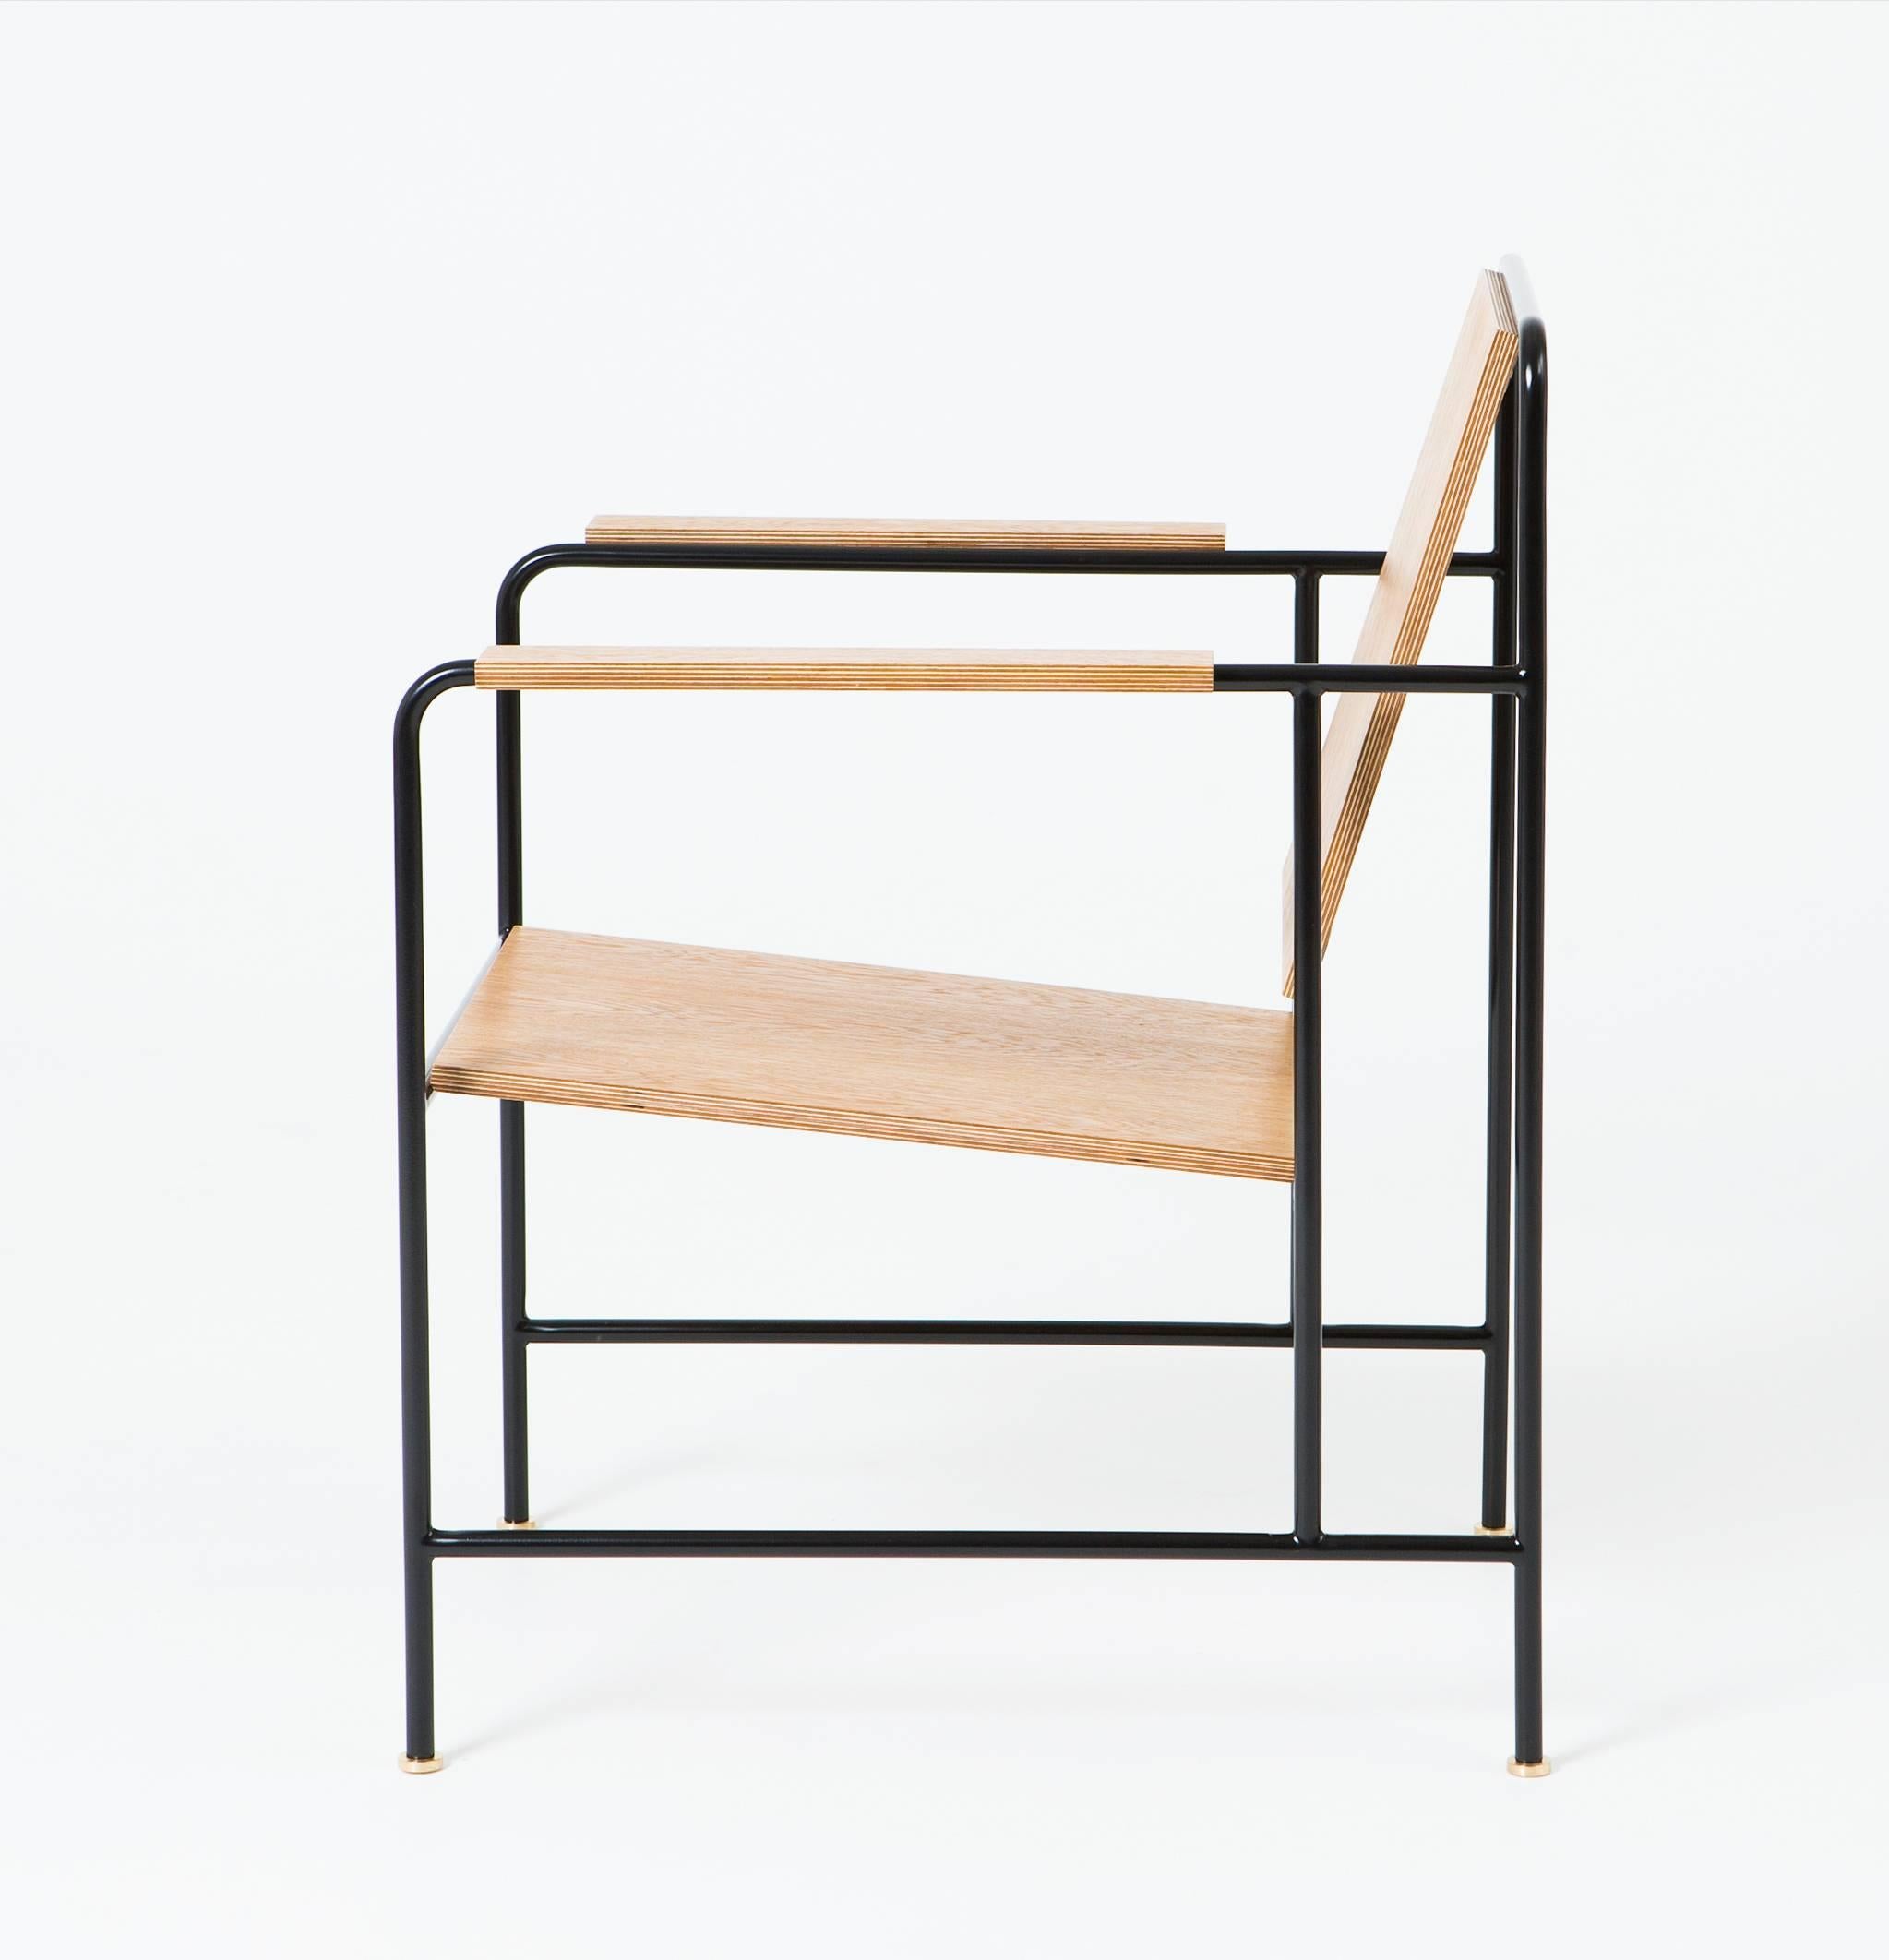 Russian M Armchair 'Oak veneer and Metal structure' - Le Corbusier inspiration For Sale